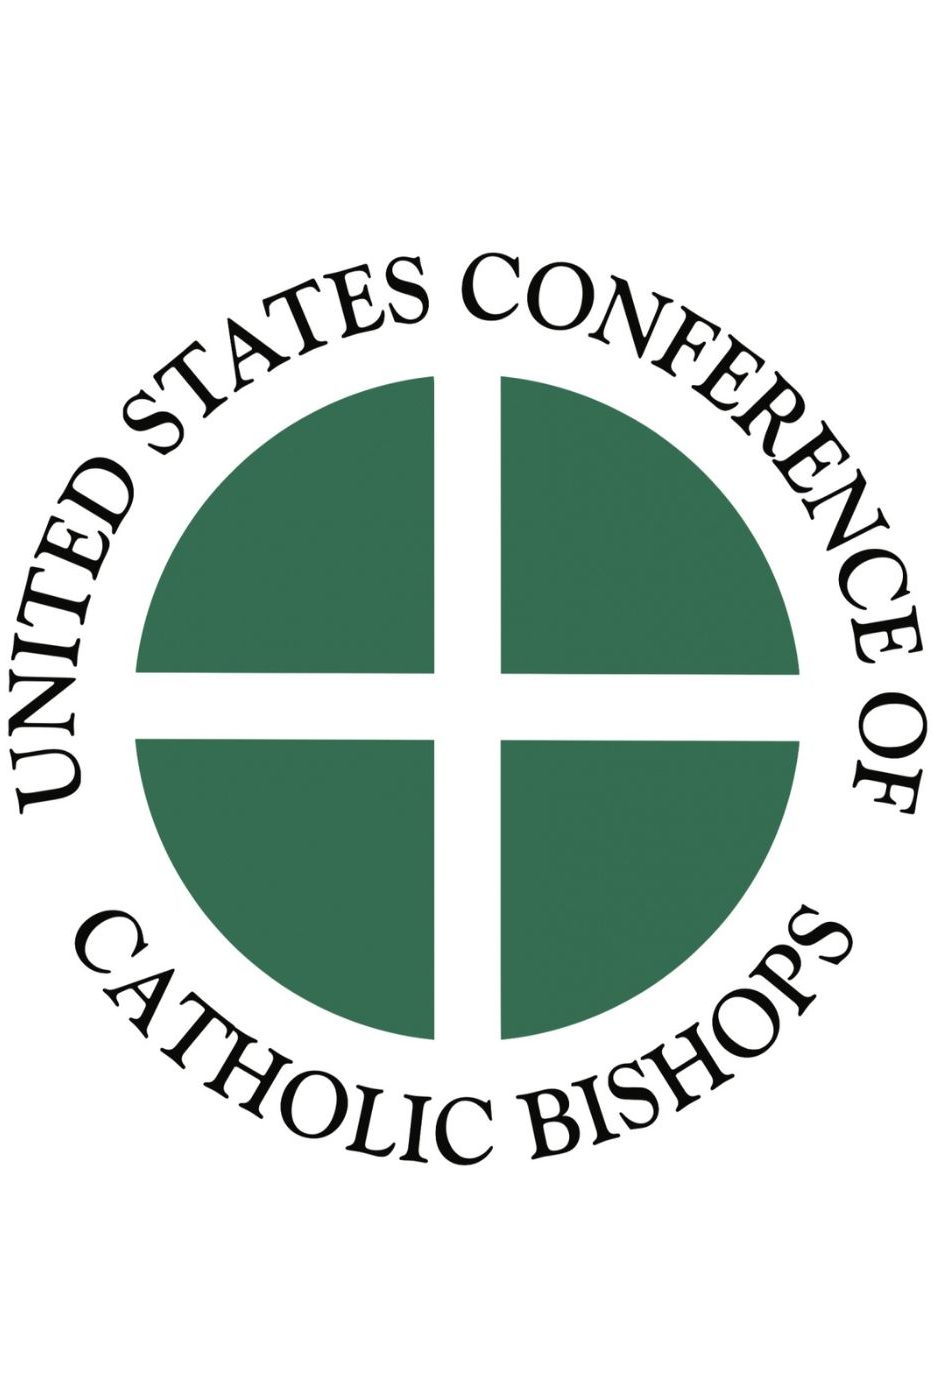 an image of the usccb logo